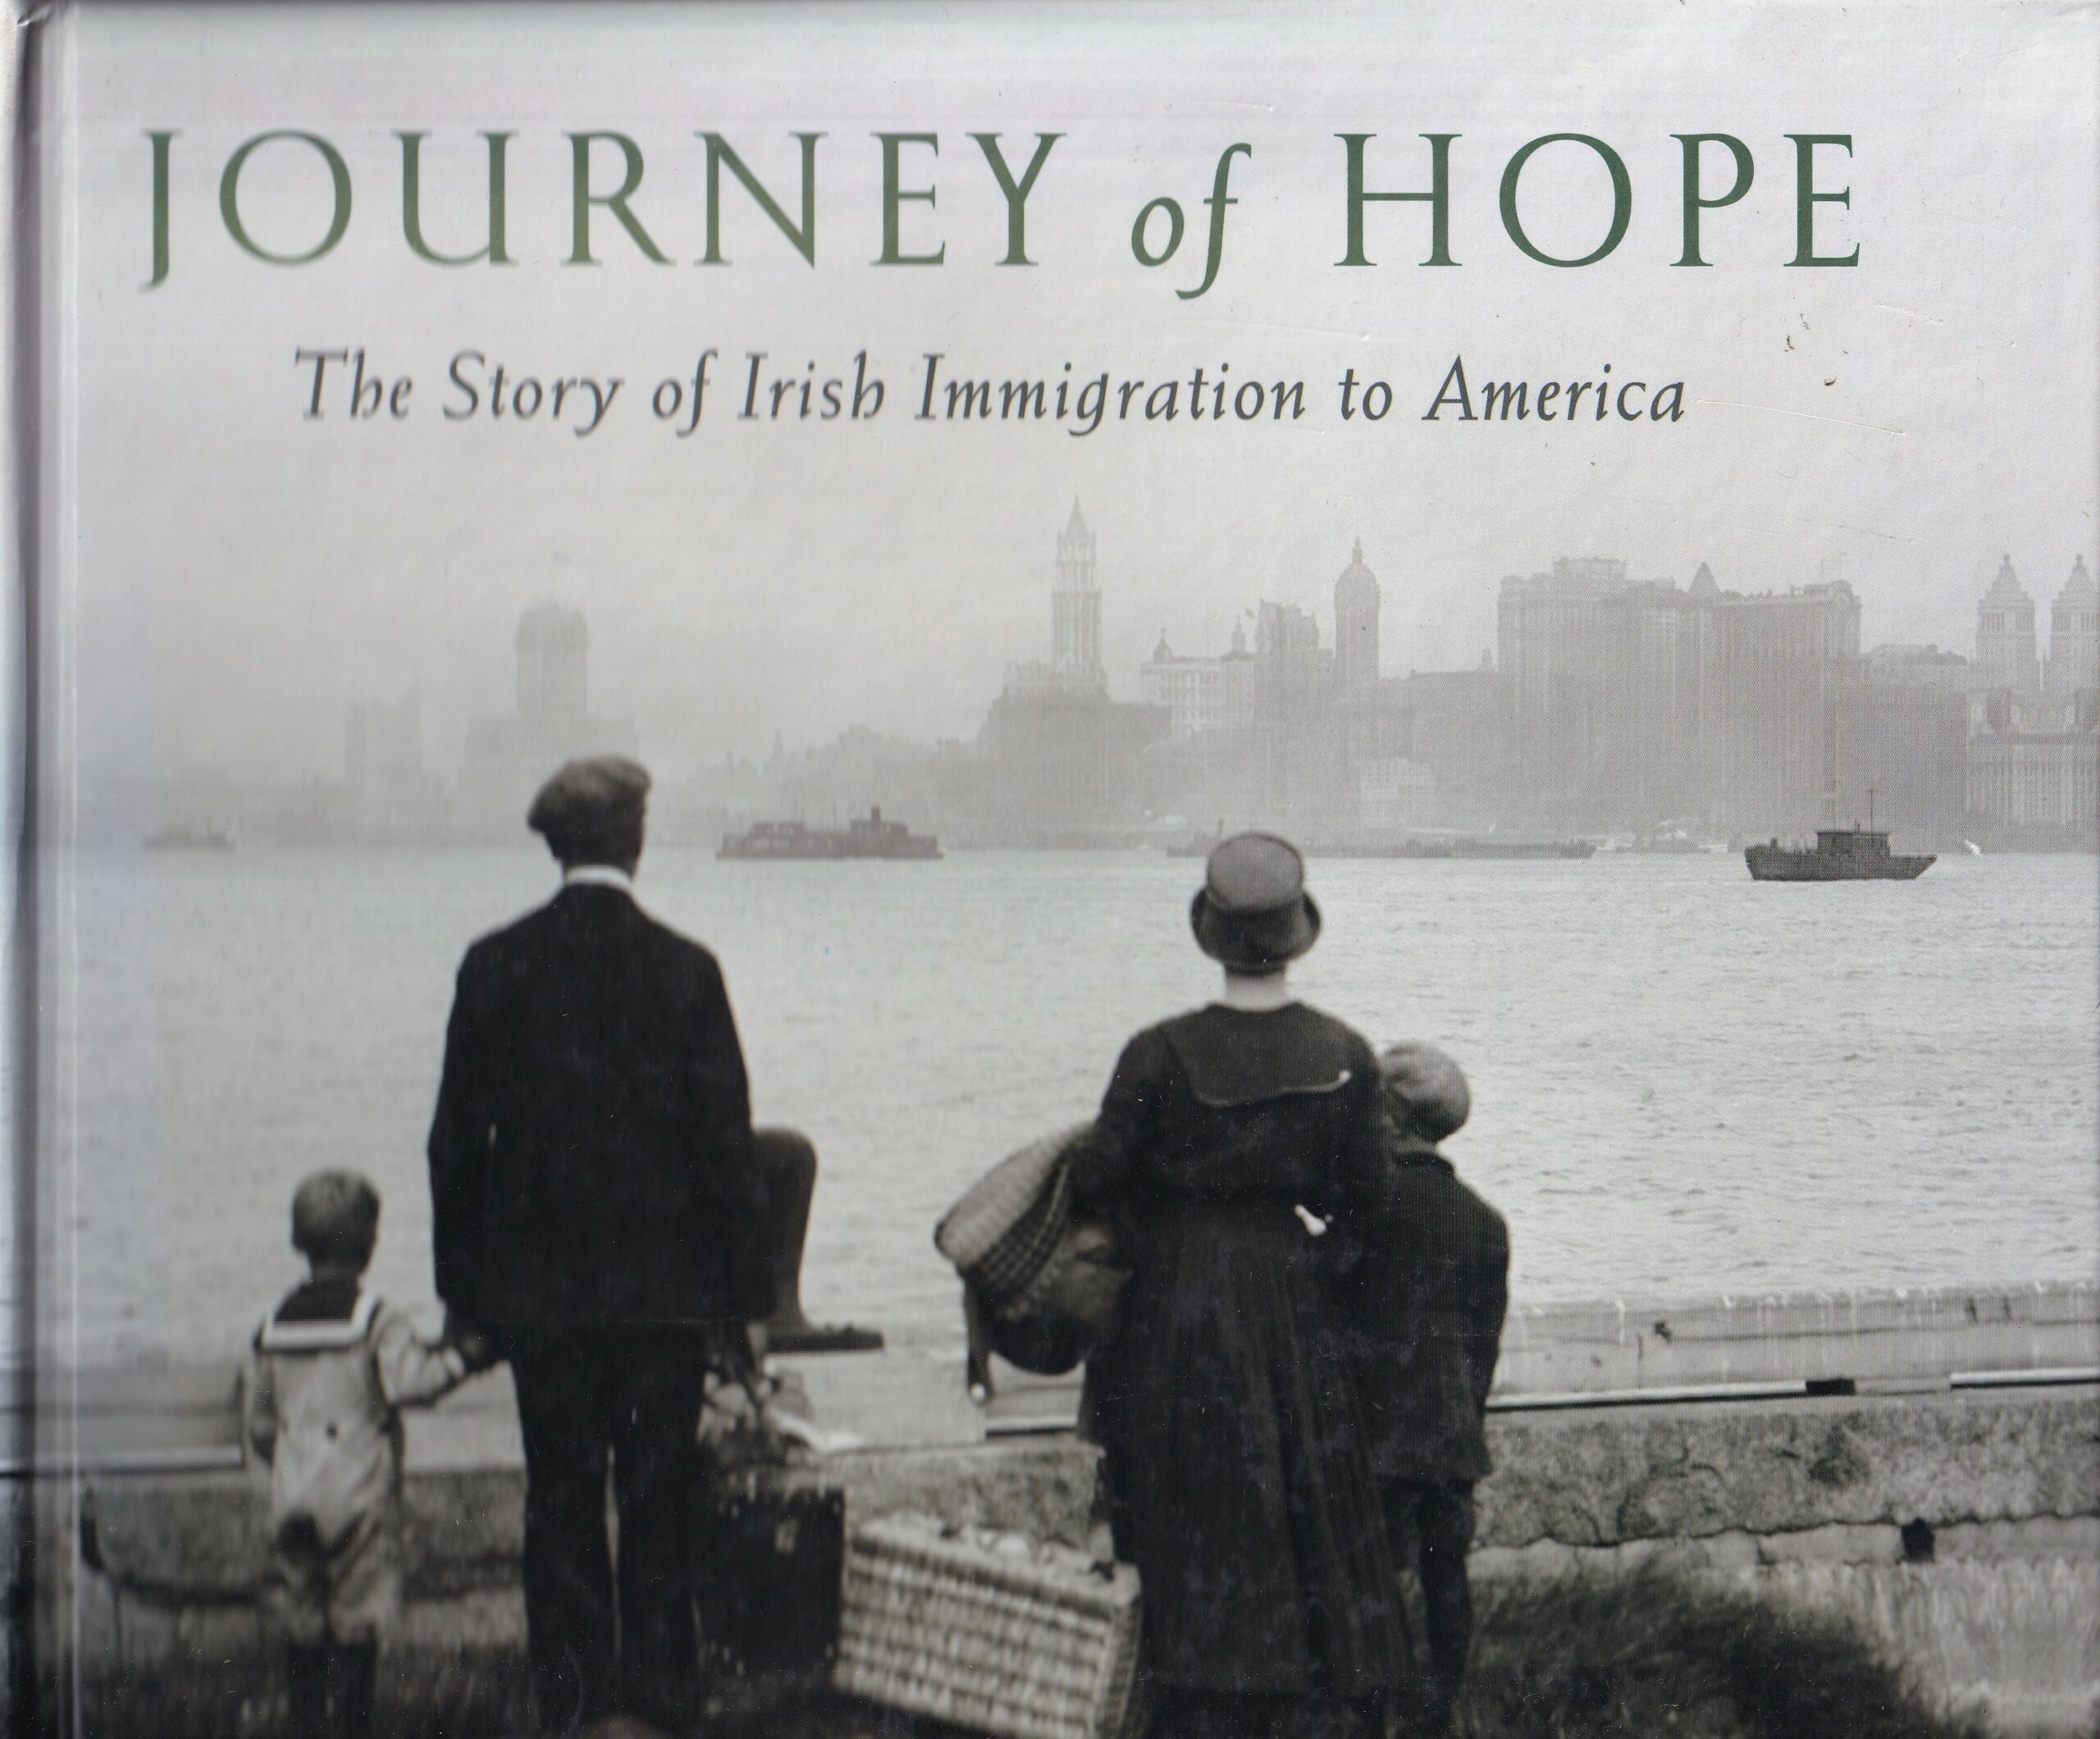 Journey of Hope: The Story of Irish Immigration to America by Kerby Miller and Patricia Mulholland Miller